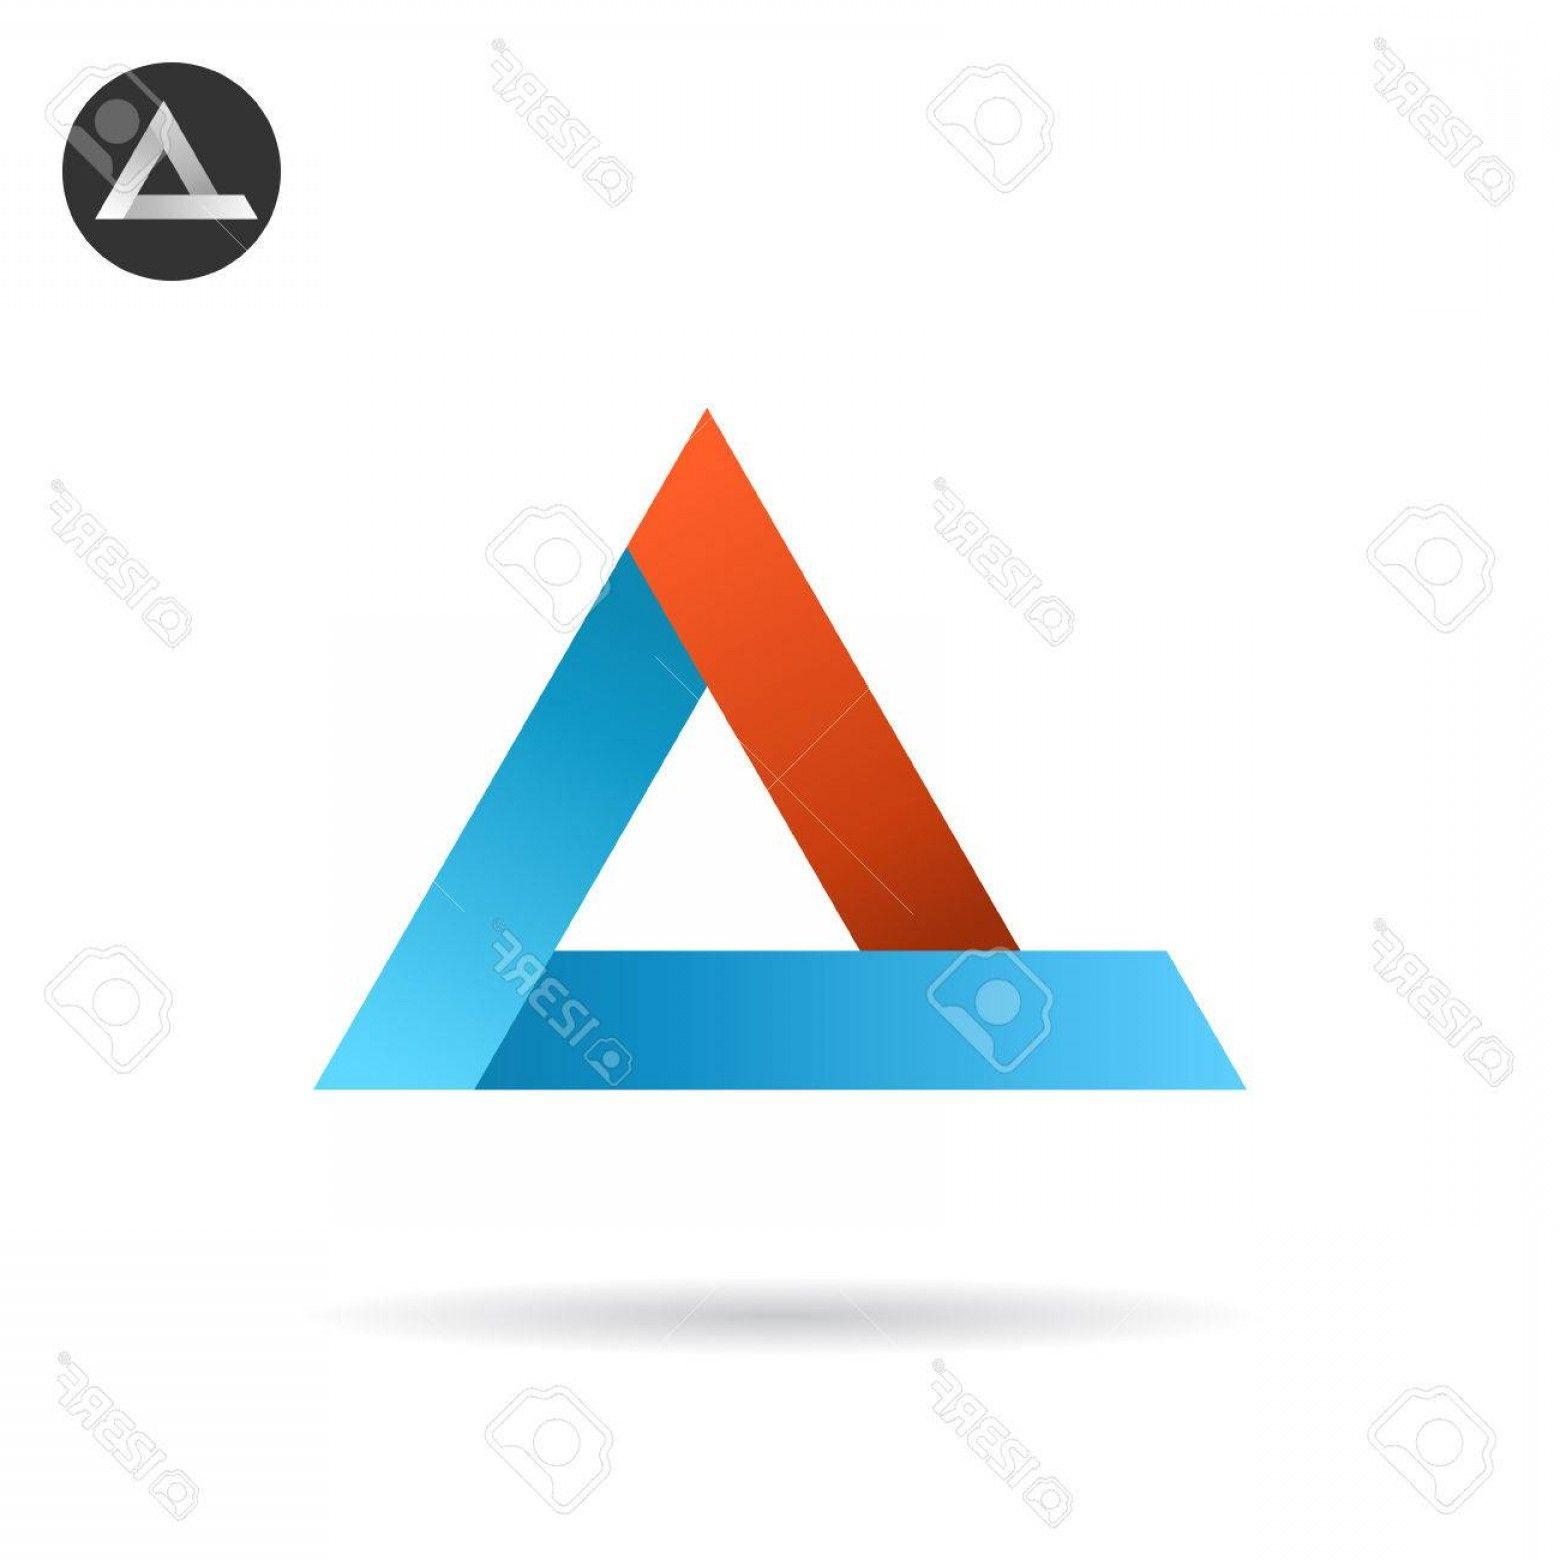 White and Blue D-Logo Logo - Photostock Vector Delta Arrow Logo In Ribbon Style Red And Blue ...